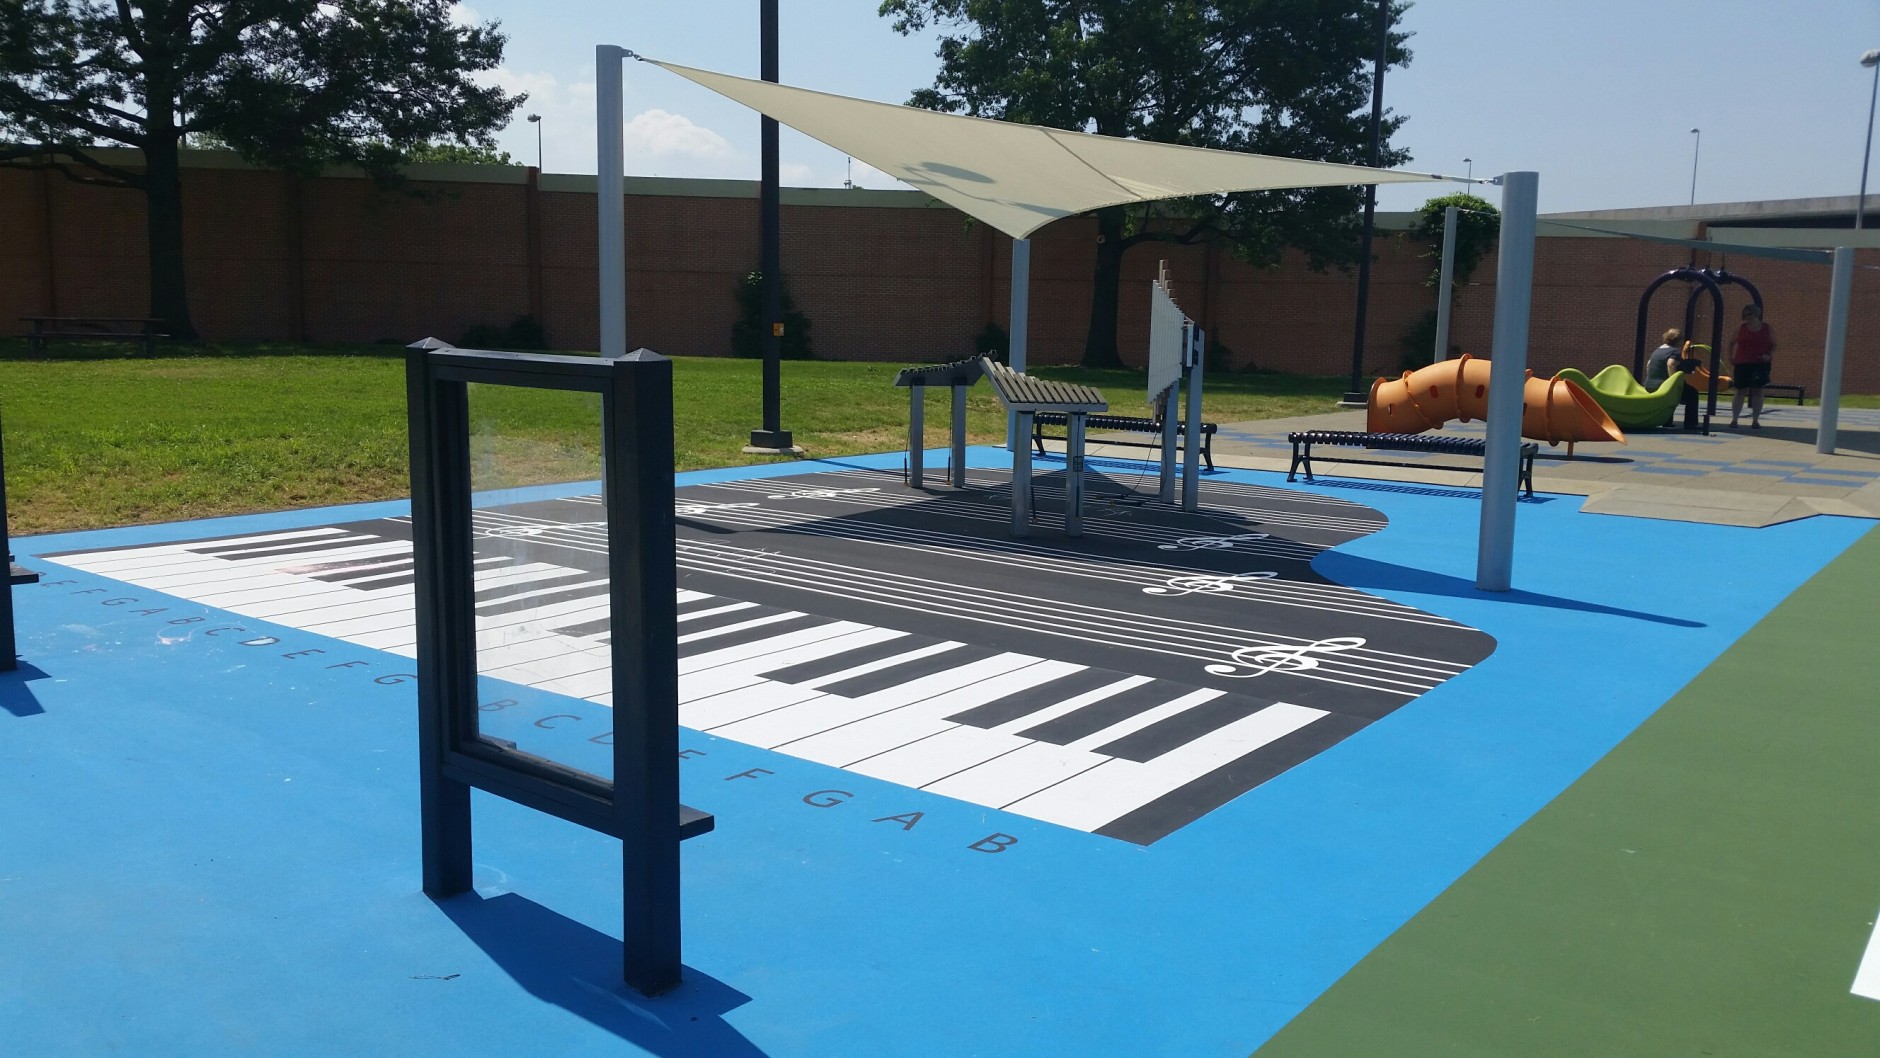 Playground for woman killed in Alexandria unveiled (Photos) - WTOP News